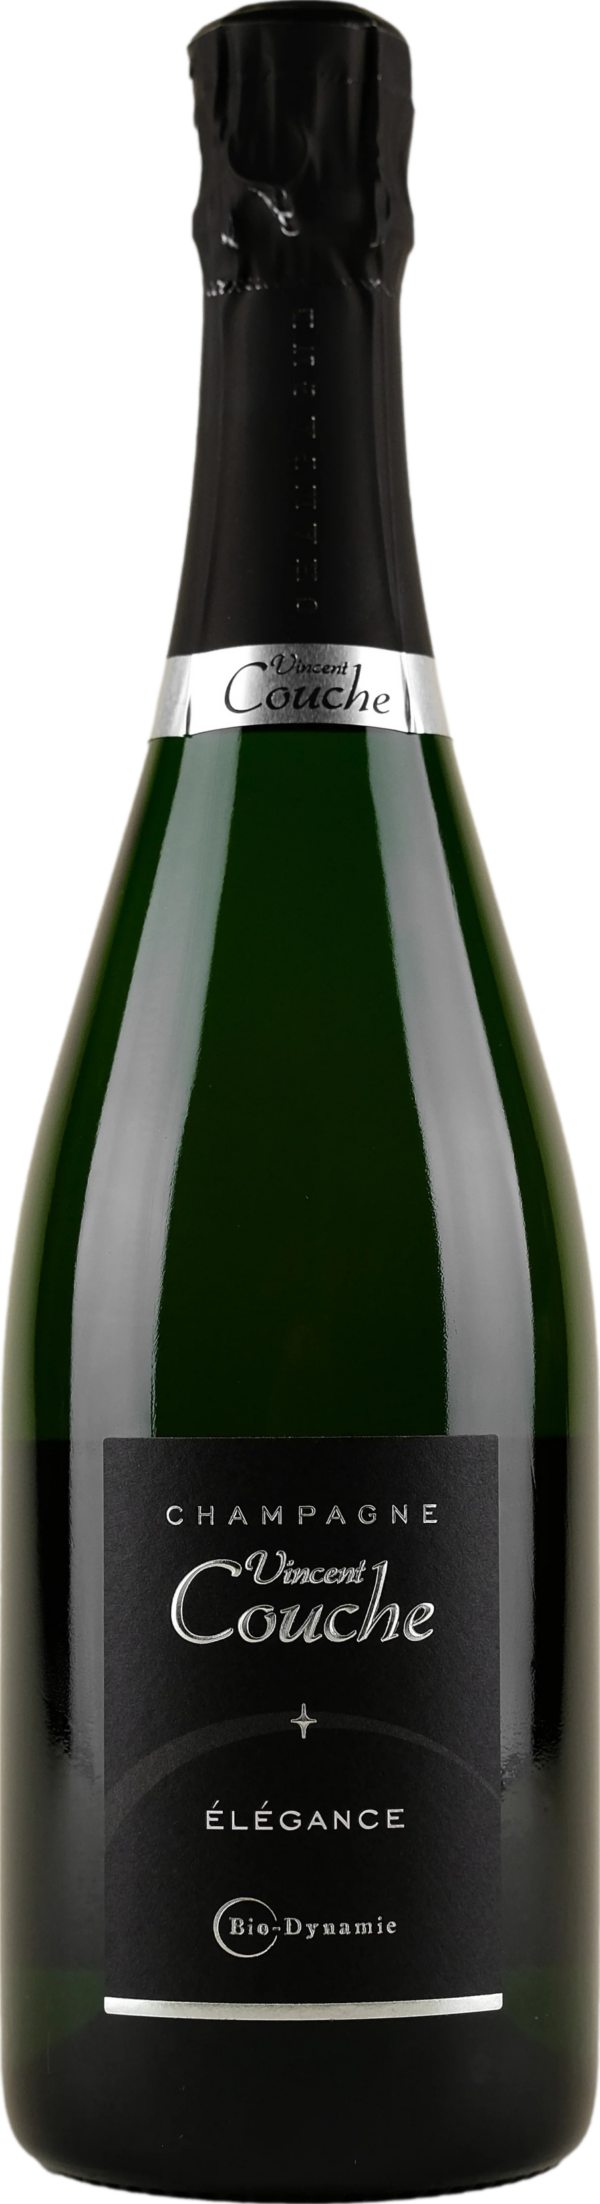 Product image of Champagne Vincent Couche Elegance from 8wines